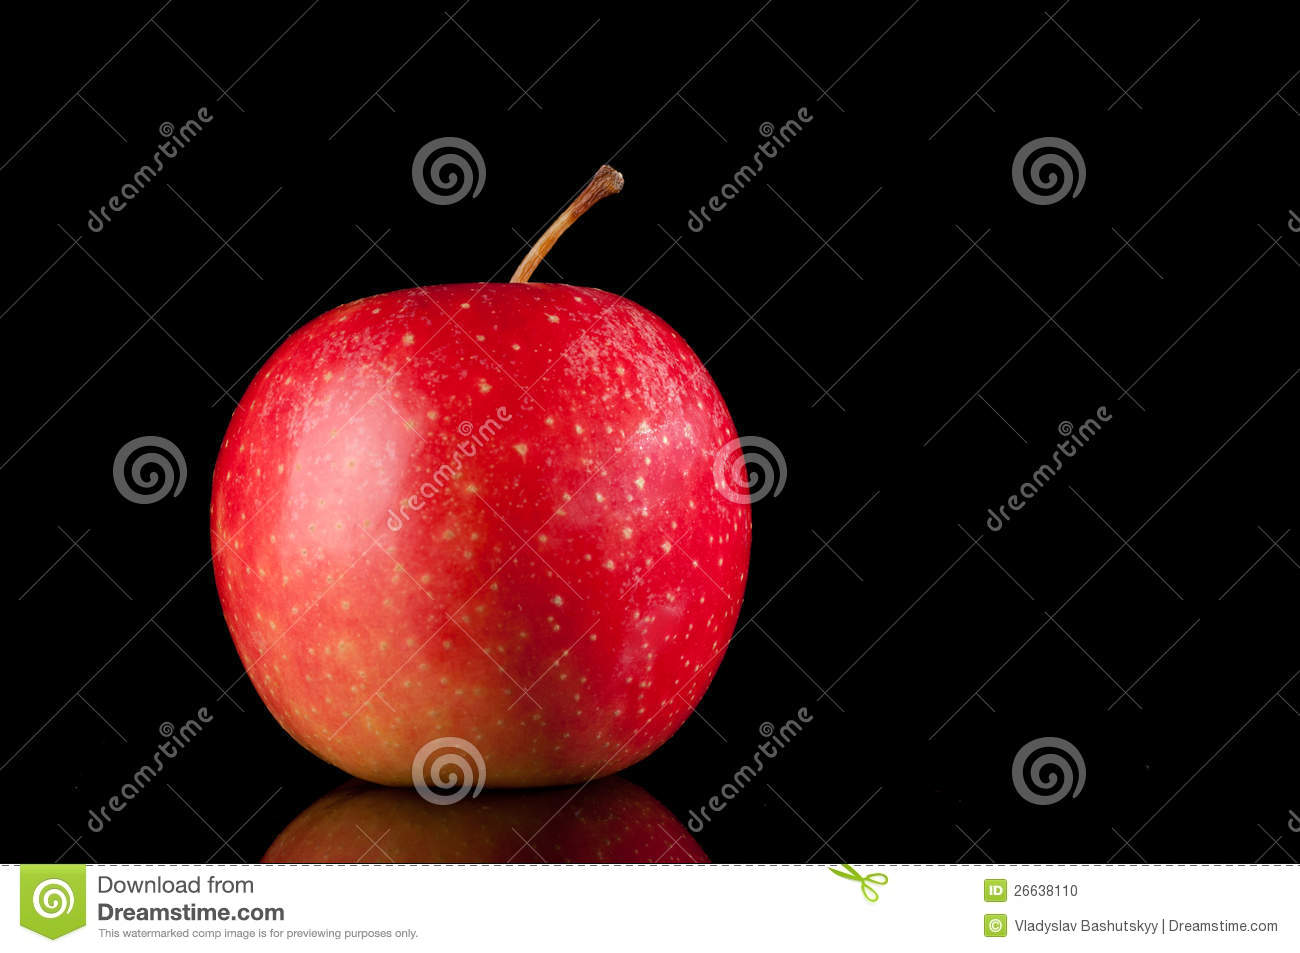 More Similar Stock Images Of   Dark Red Apple  On Black